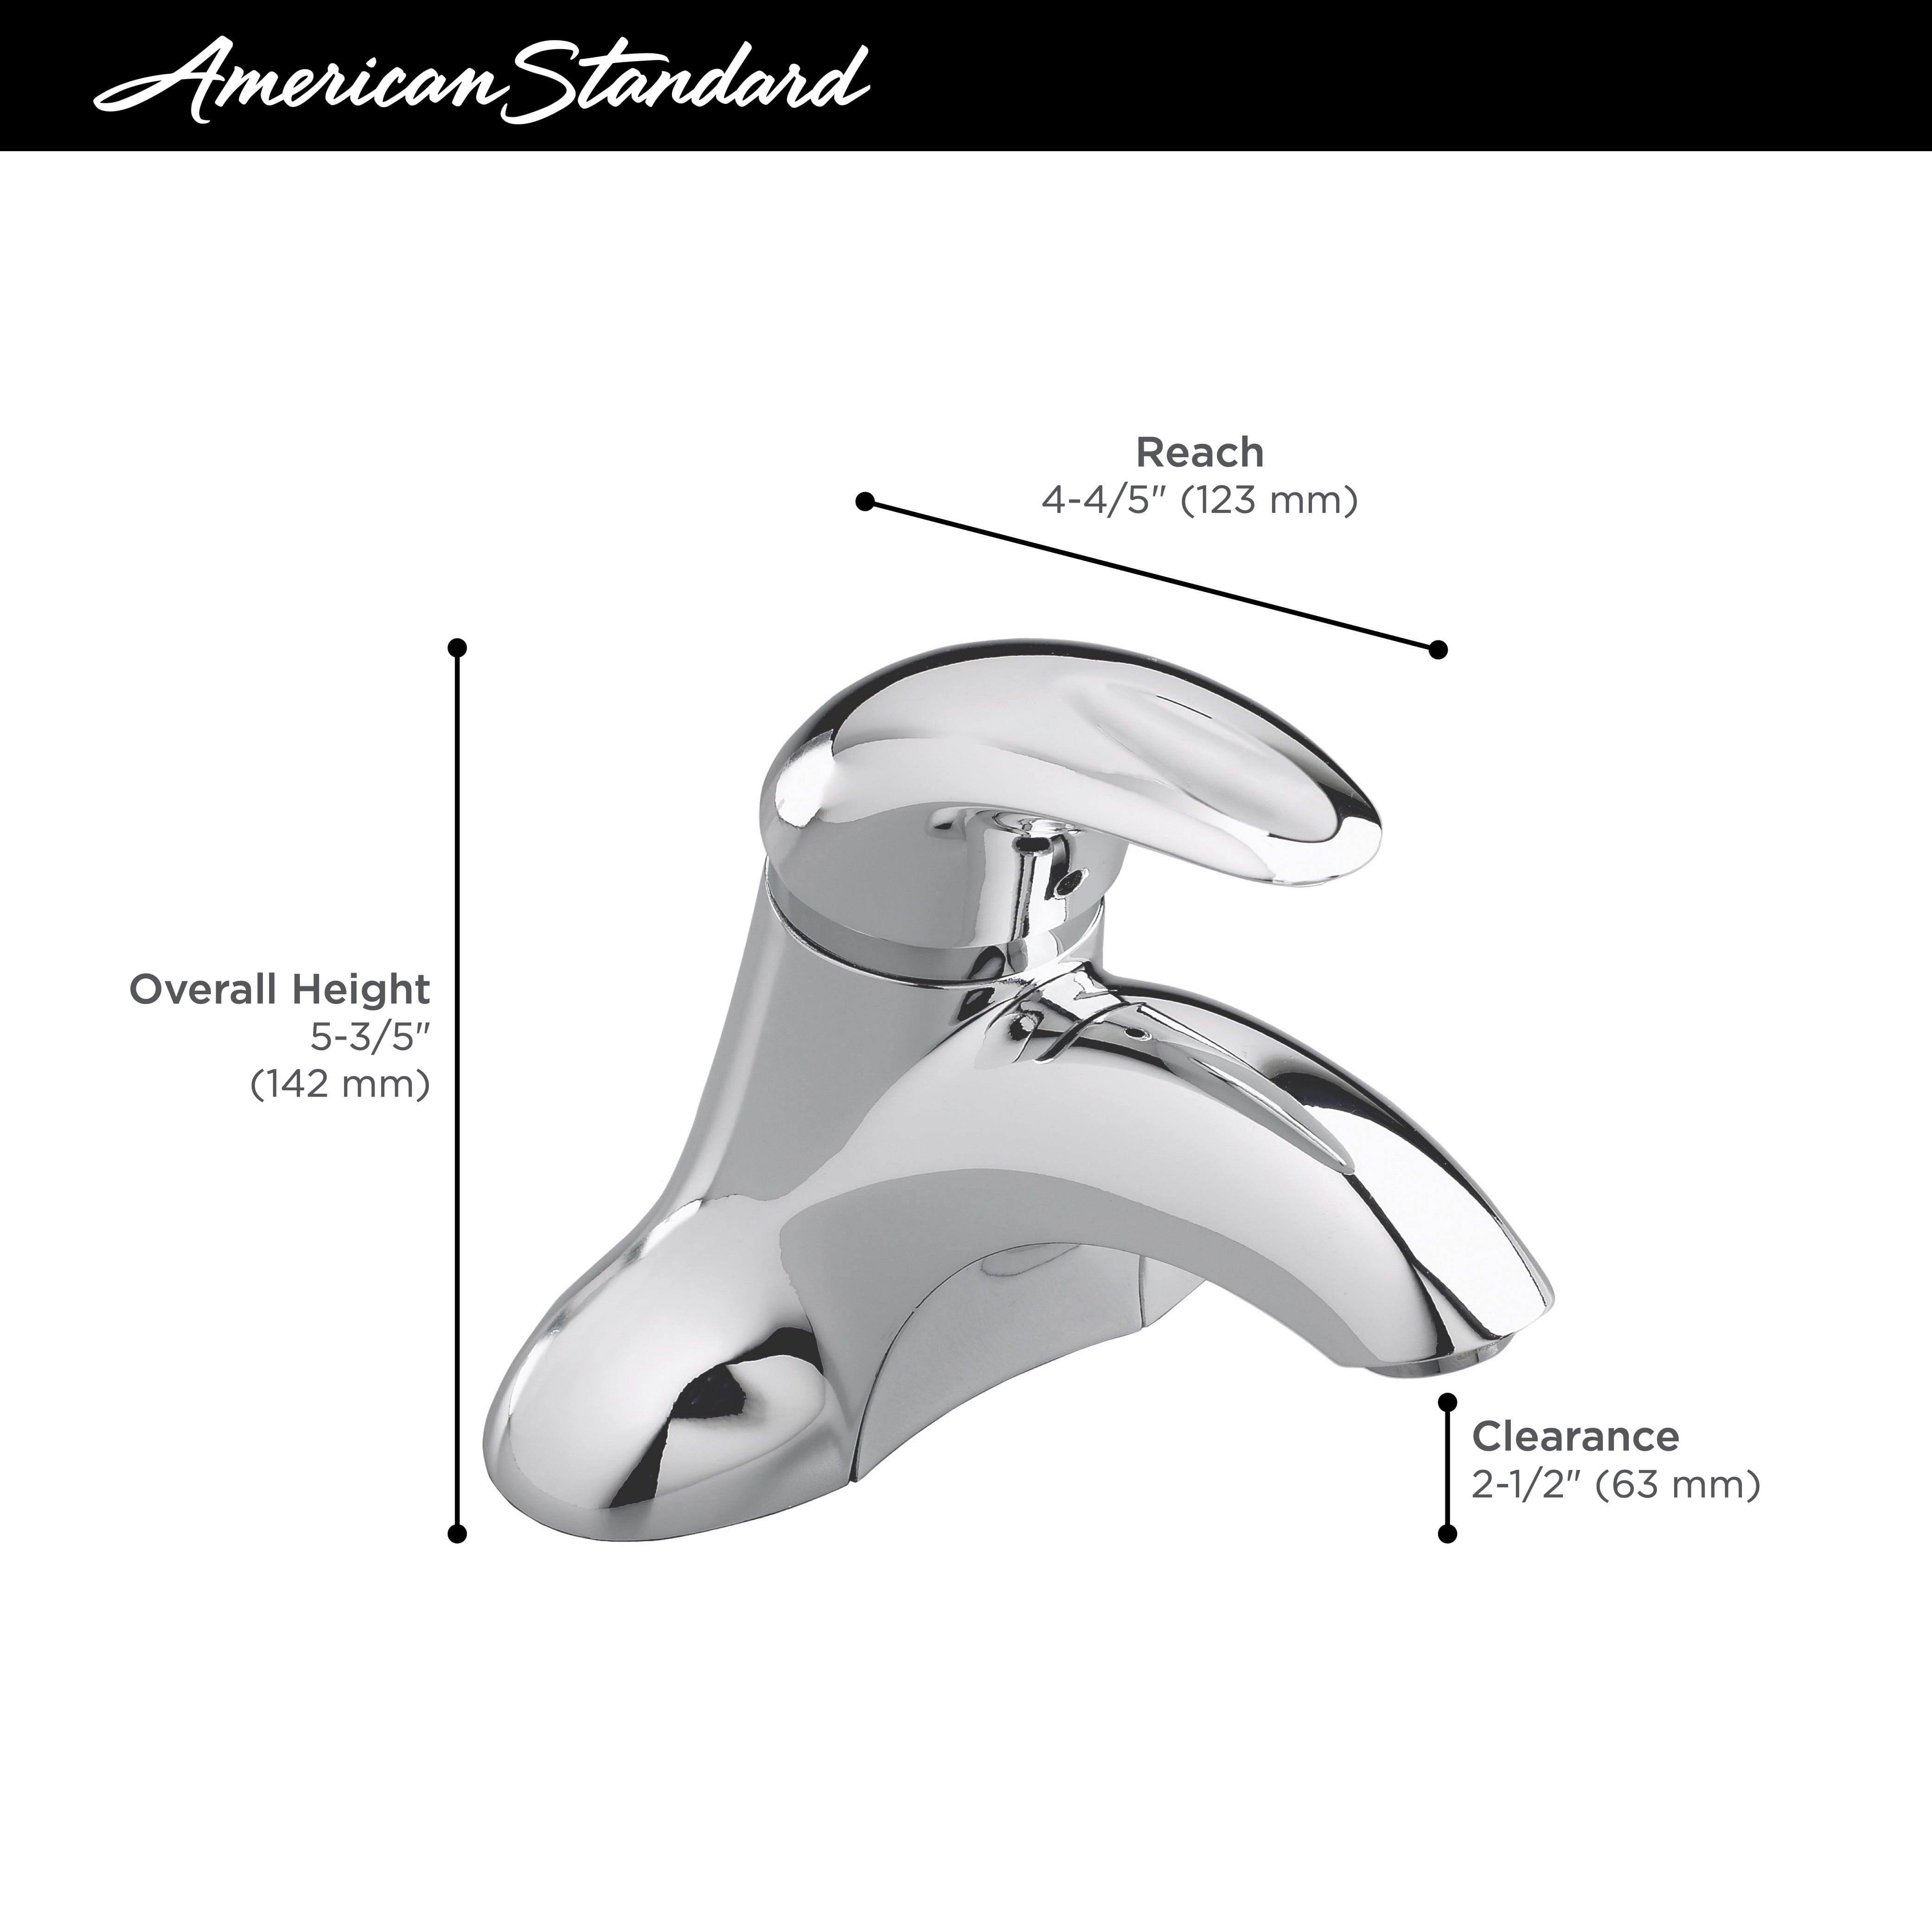 Reliant 3® 4-Inch Centerset Single-Handle Bathroom Faucet 1.2 gpm/4.5 L/min With Lever Handle